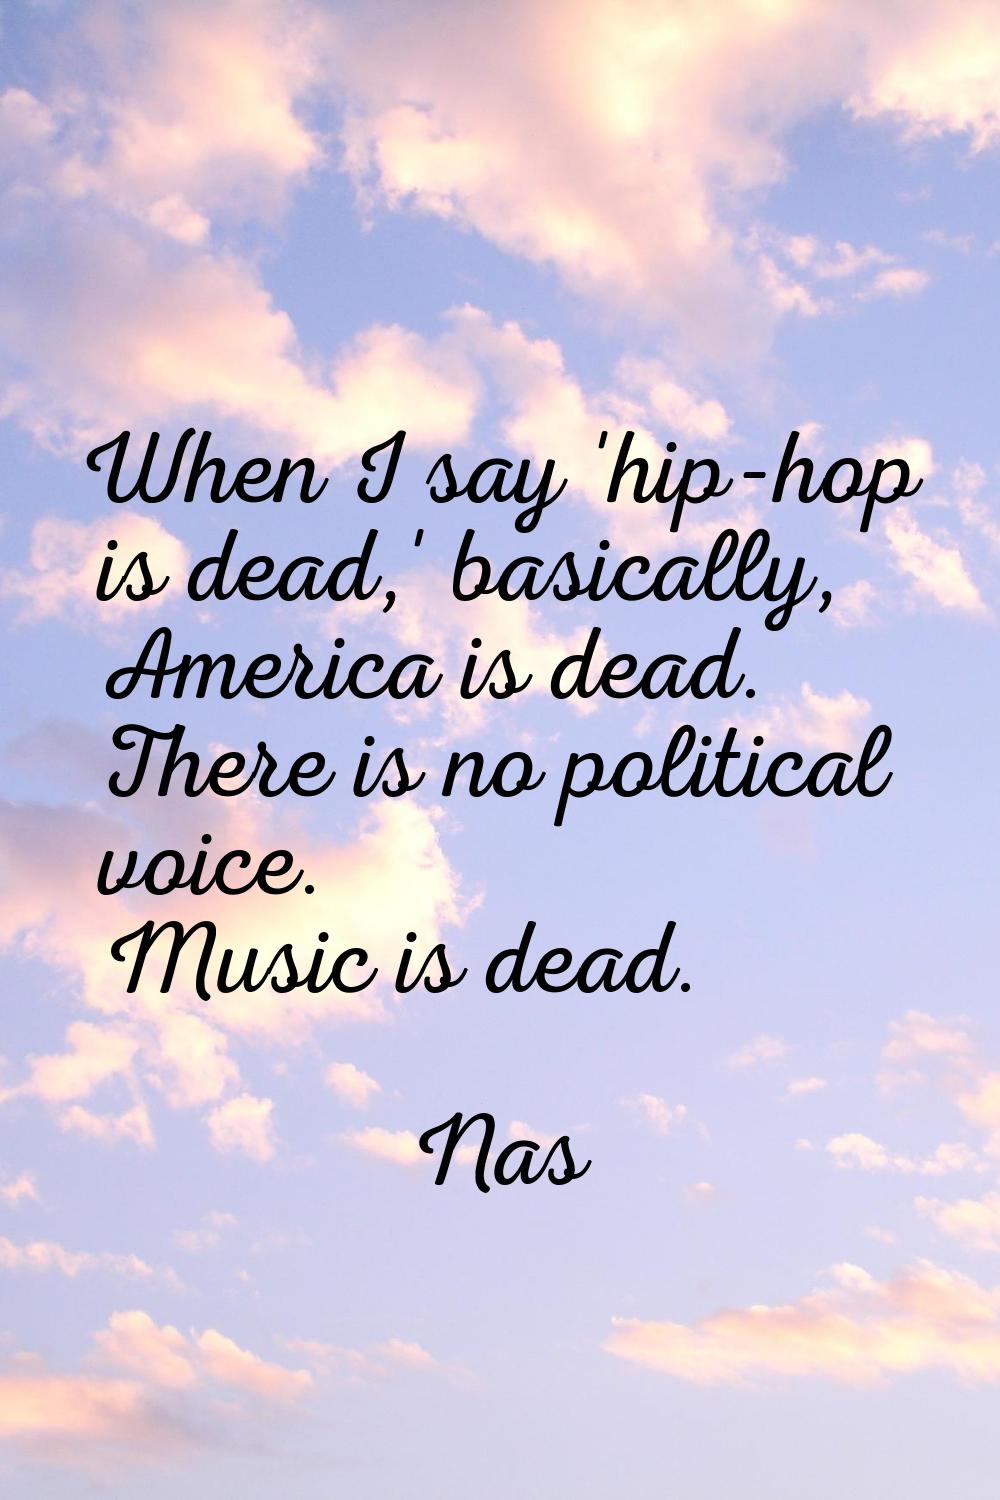 When I say 'hip-hop is dead,' basically, America is dead. There is no political voice. Music is dea